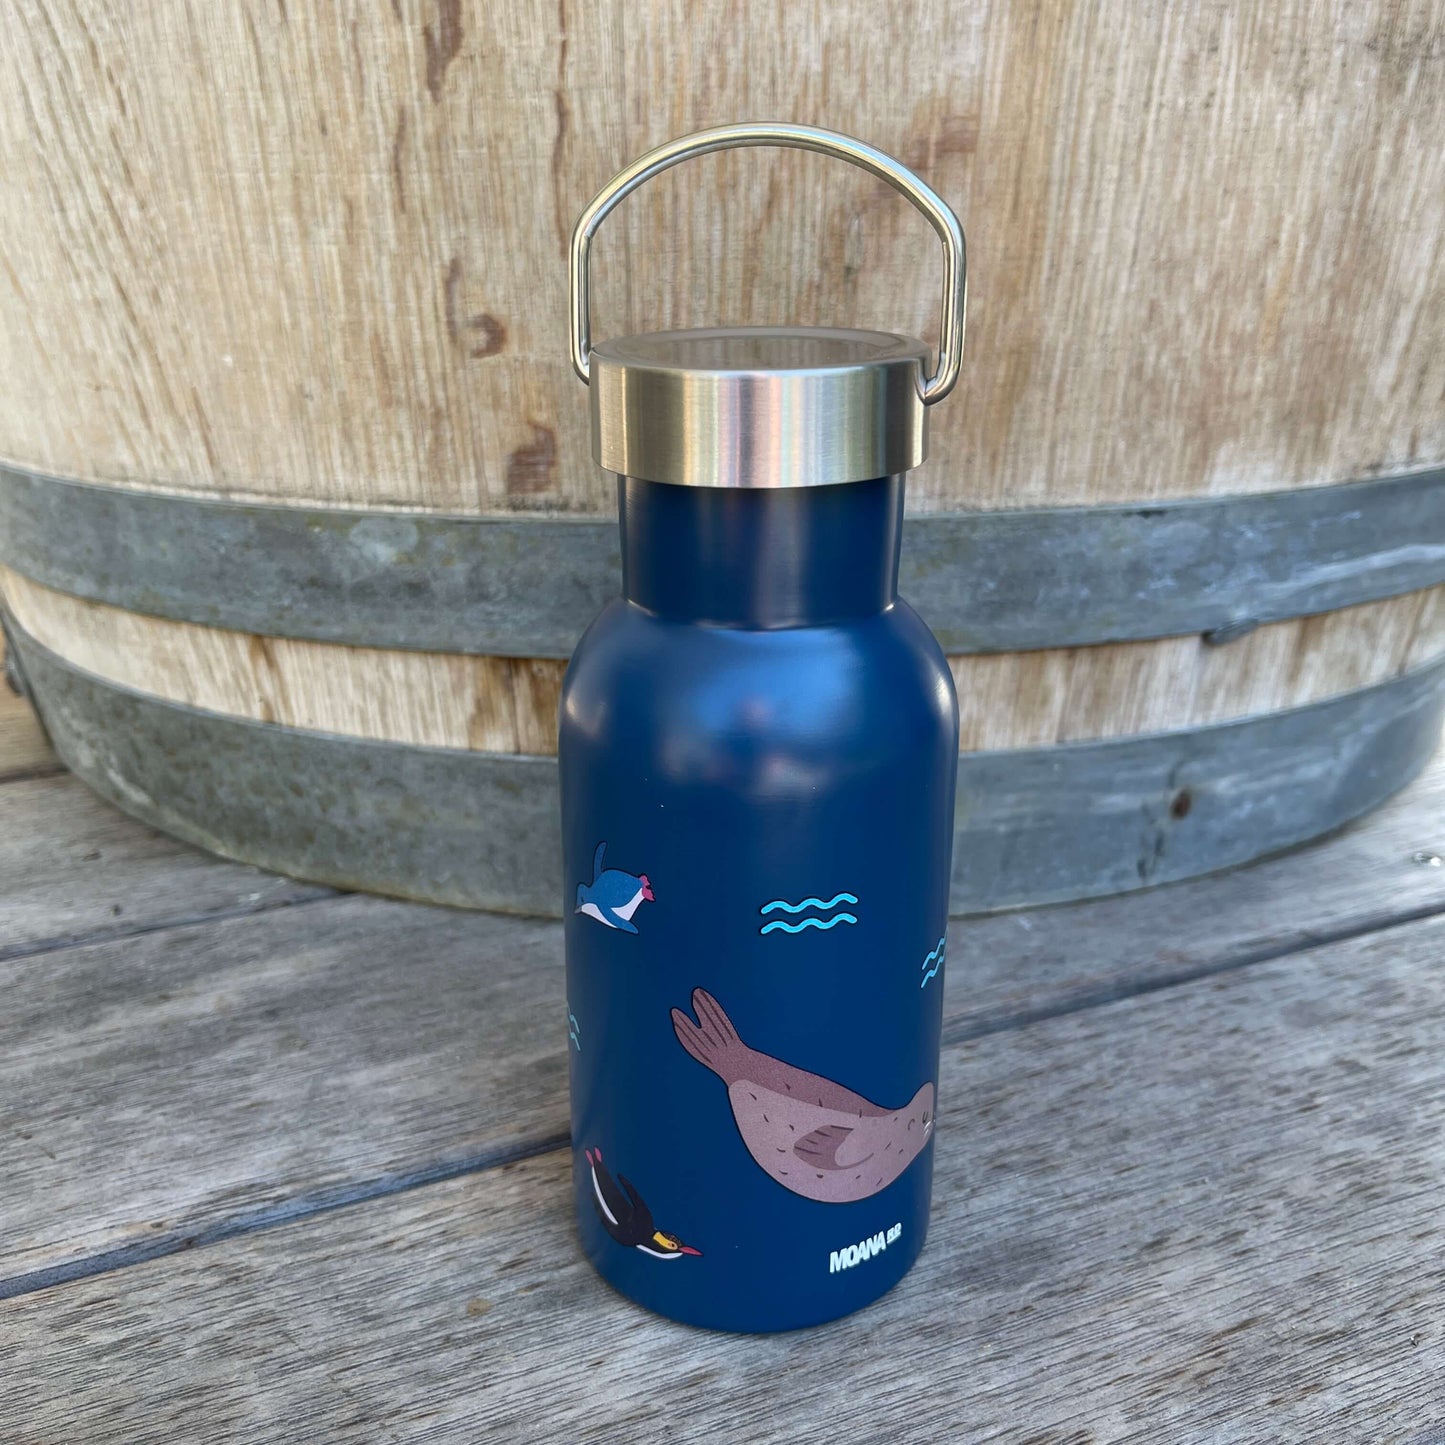 Small kids drink bottle with a stainless screw top in dark blue with New Zealand marine life on it.